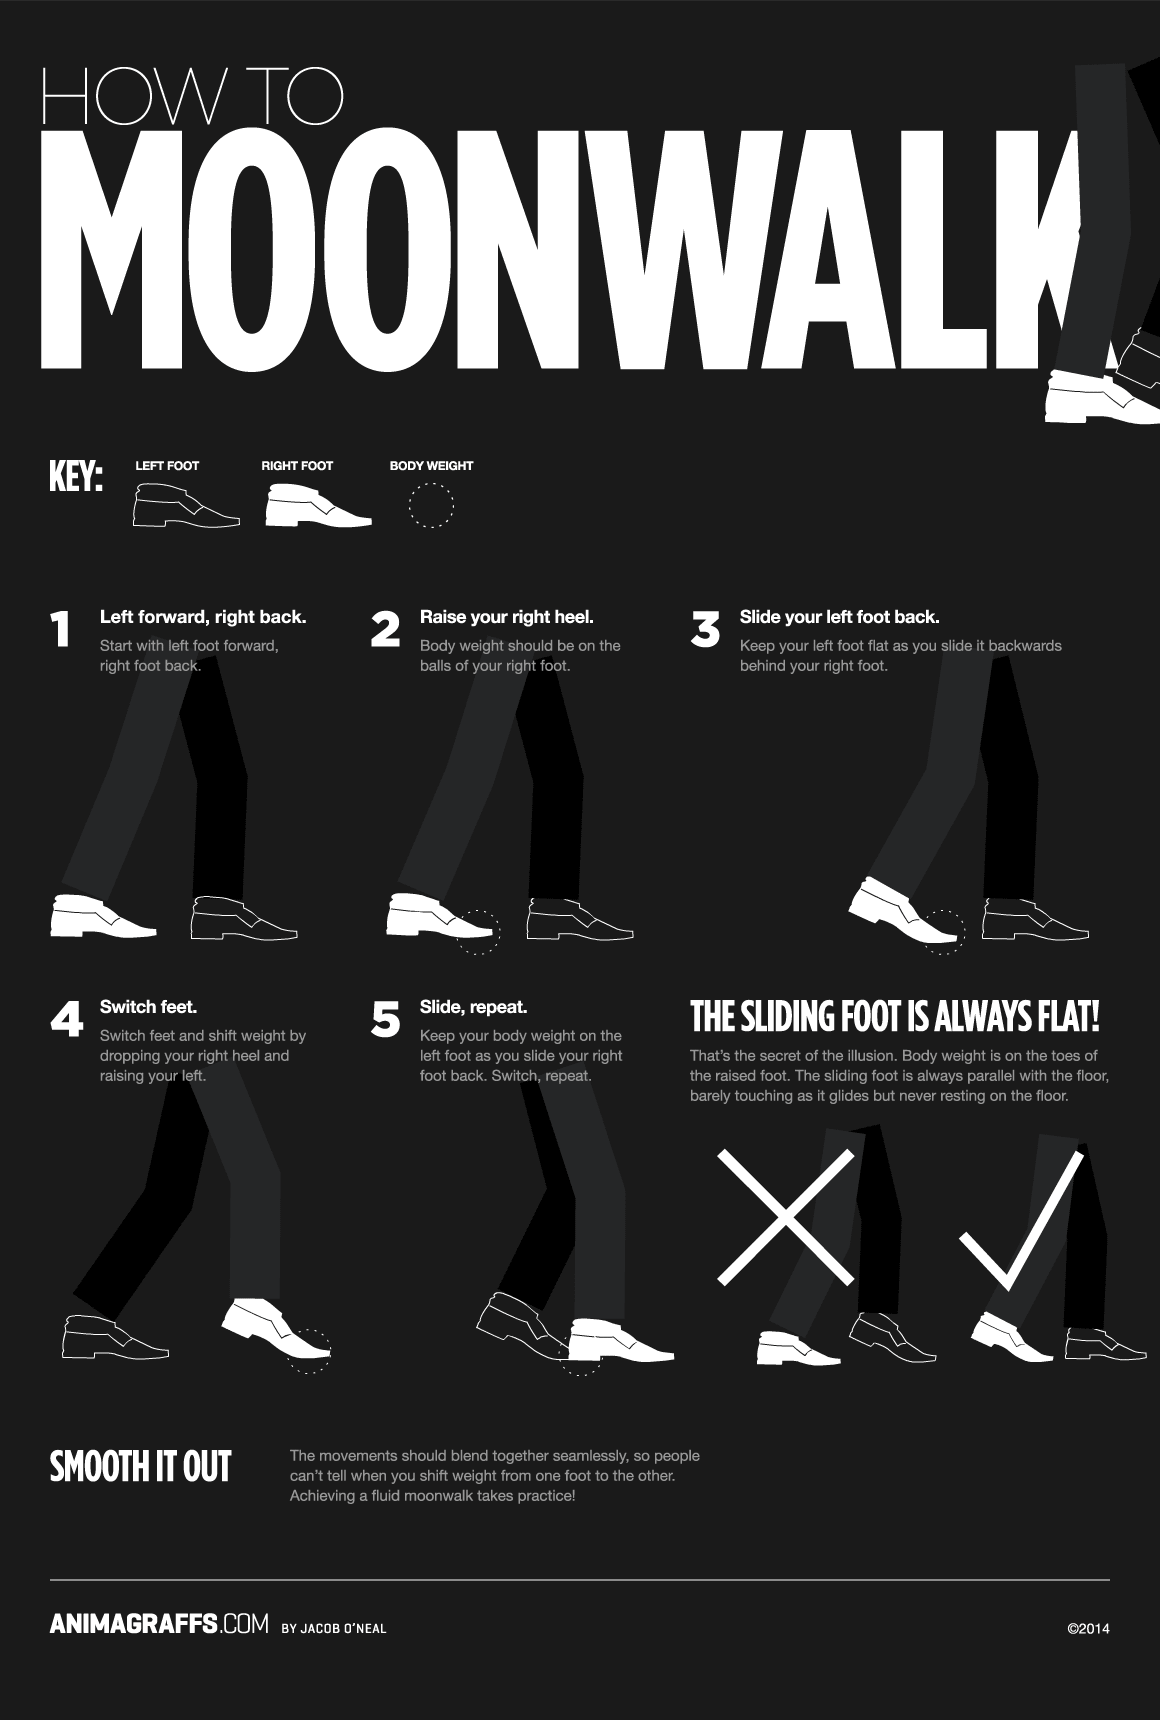 funny randoms - learn moonwalk - How To Moonwalk Key Left forward, right back Sch St p in your Smooth It Out Animagraffs.Com Sep er tager nga heve treba to Side your lo The Sliding Foot Is Always Flat! X